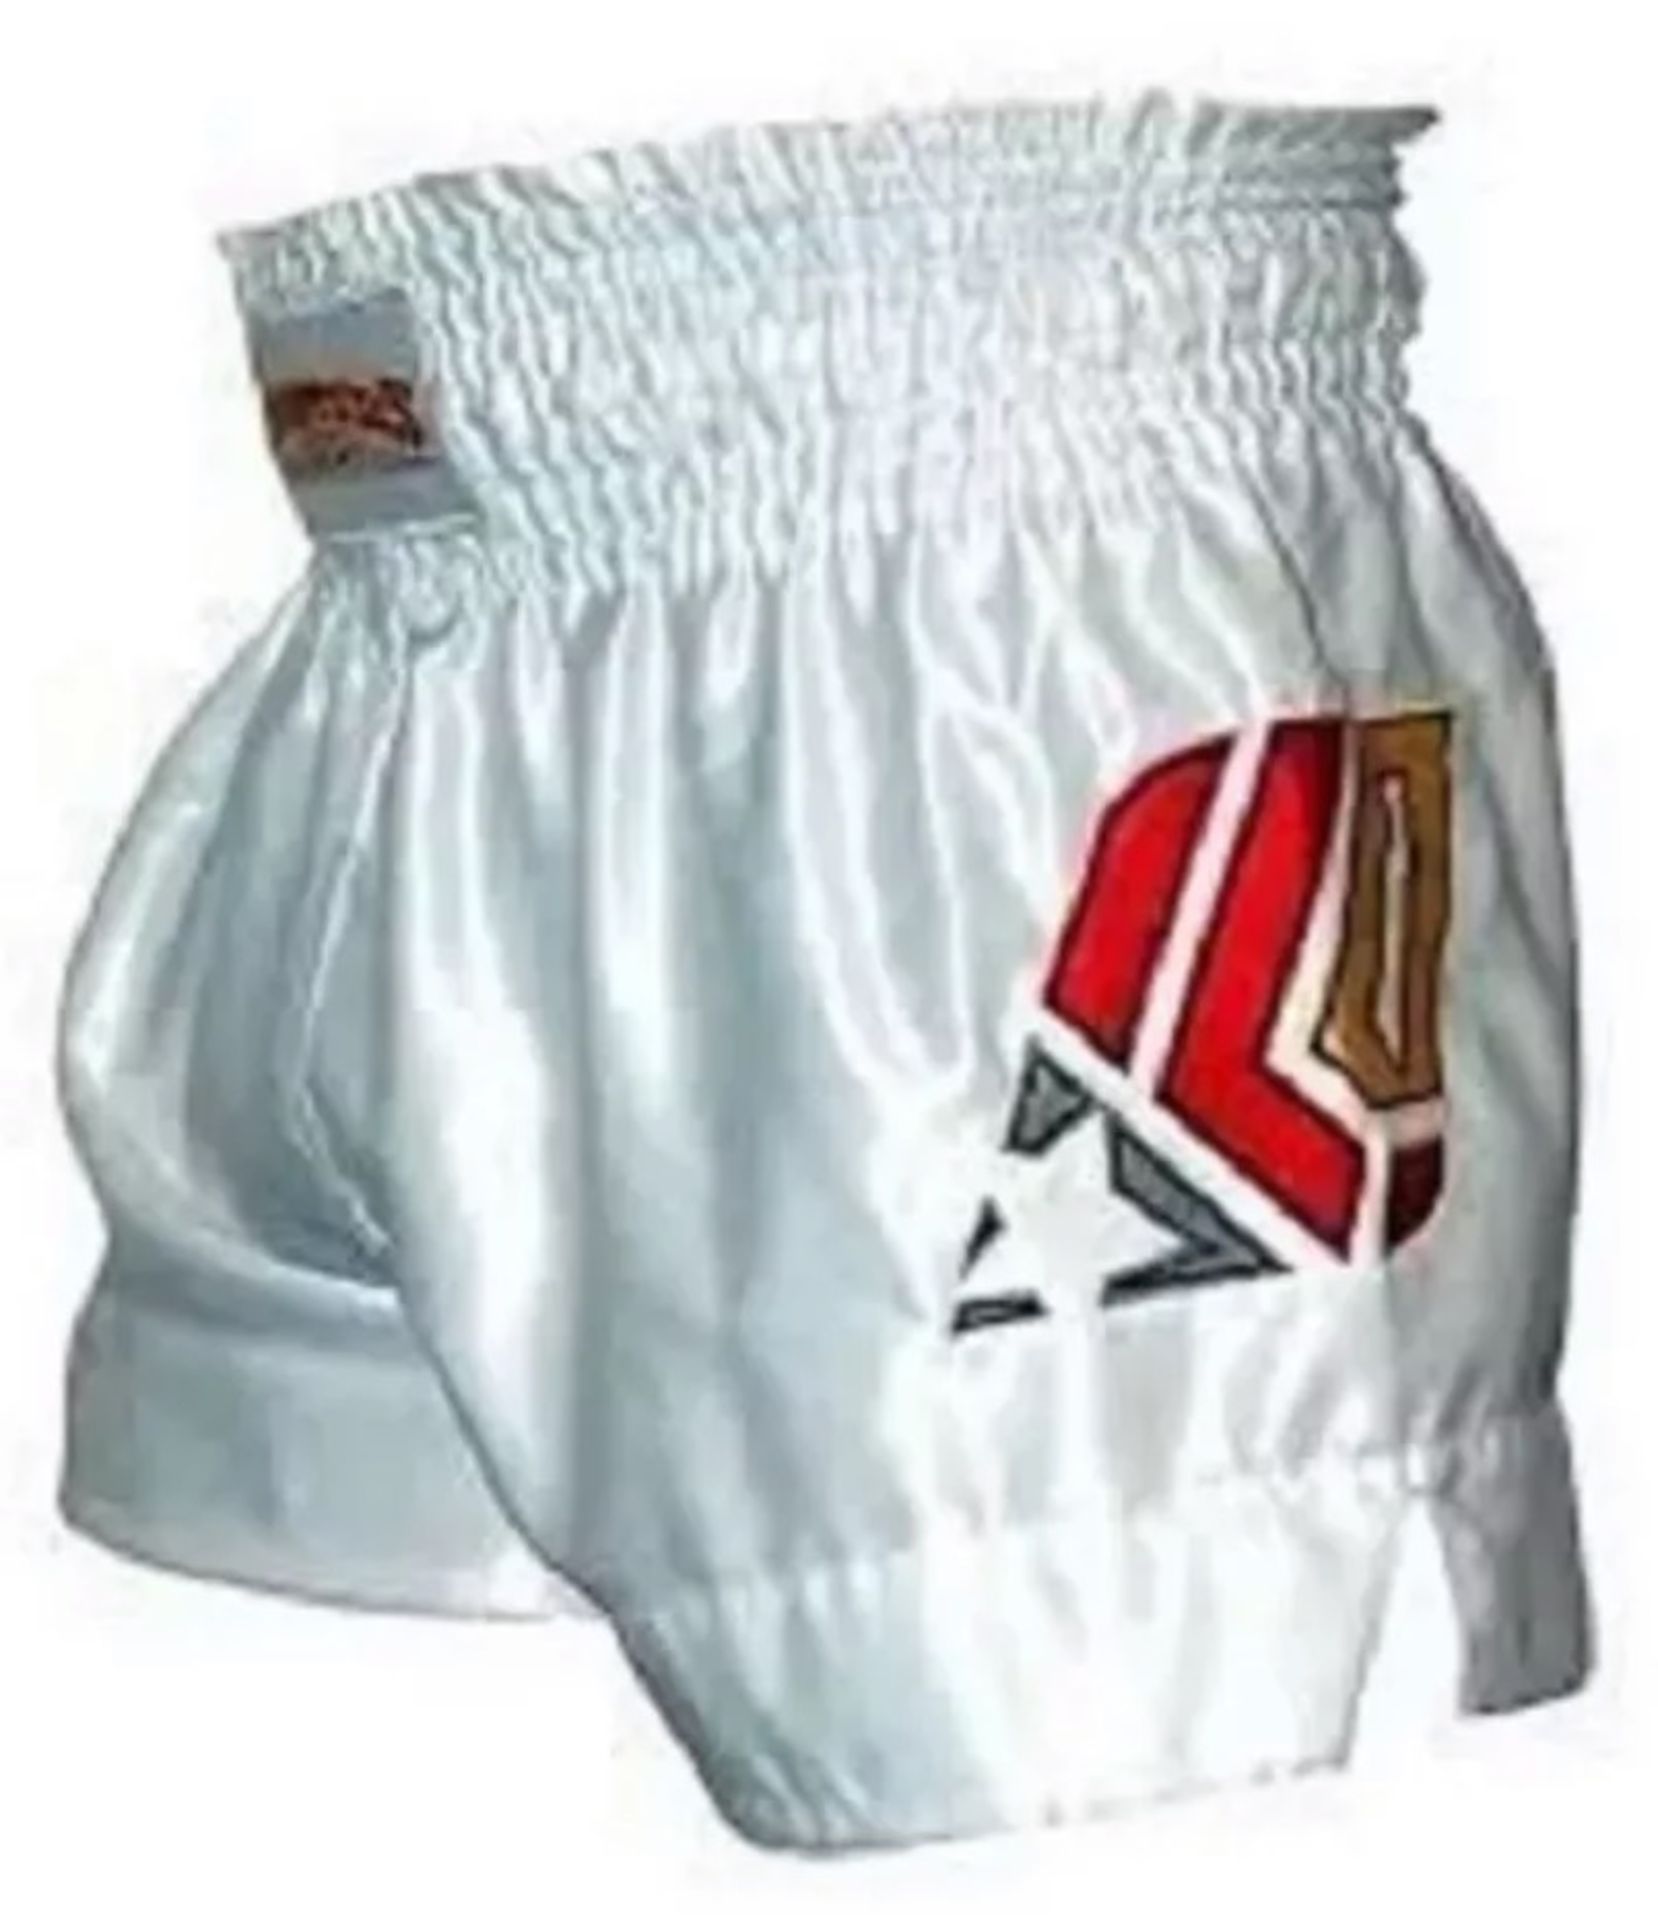 47 Pairs "Fighters Only" Shorts - MMA UFC